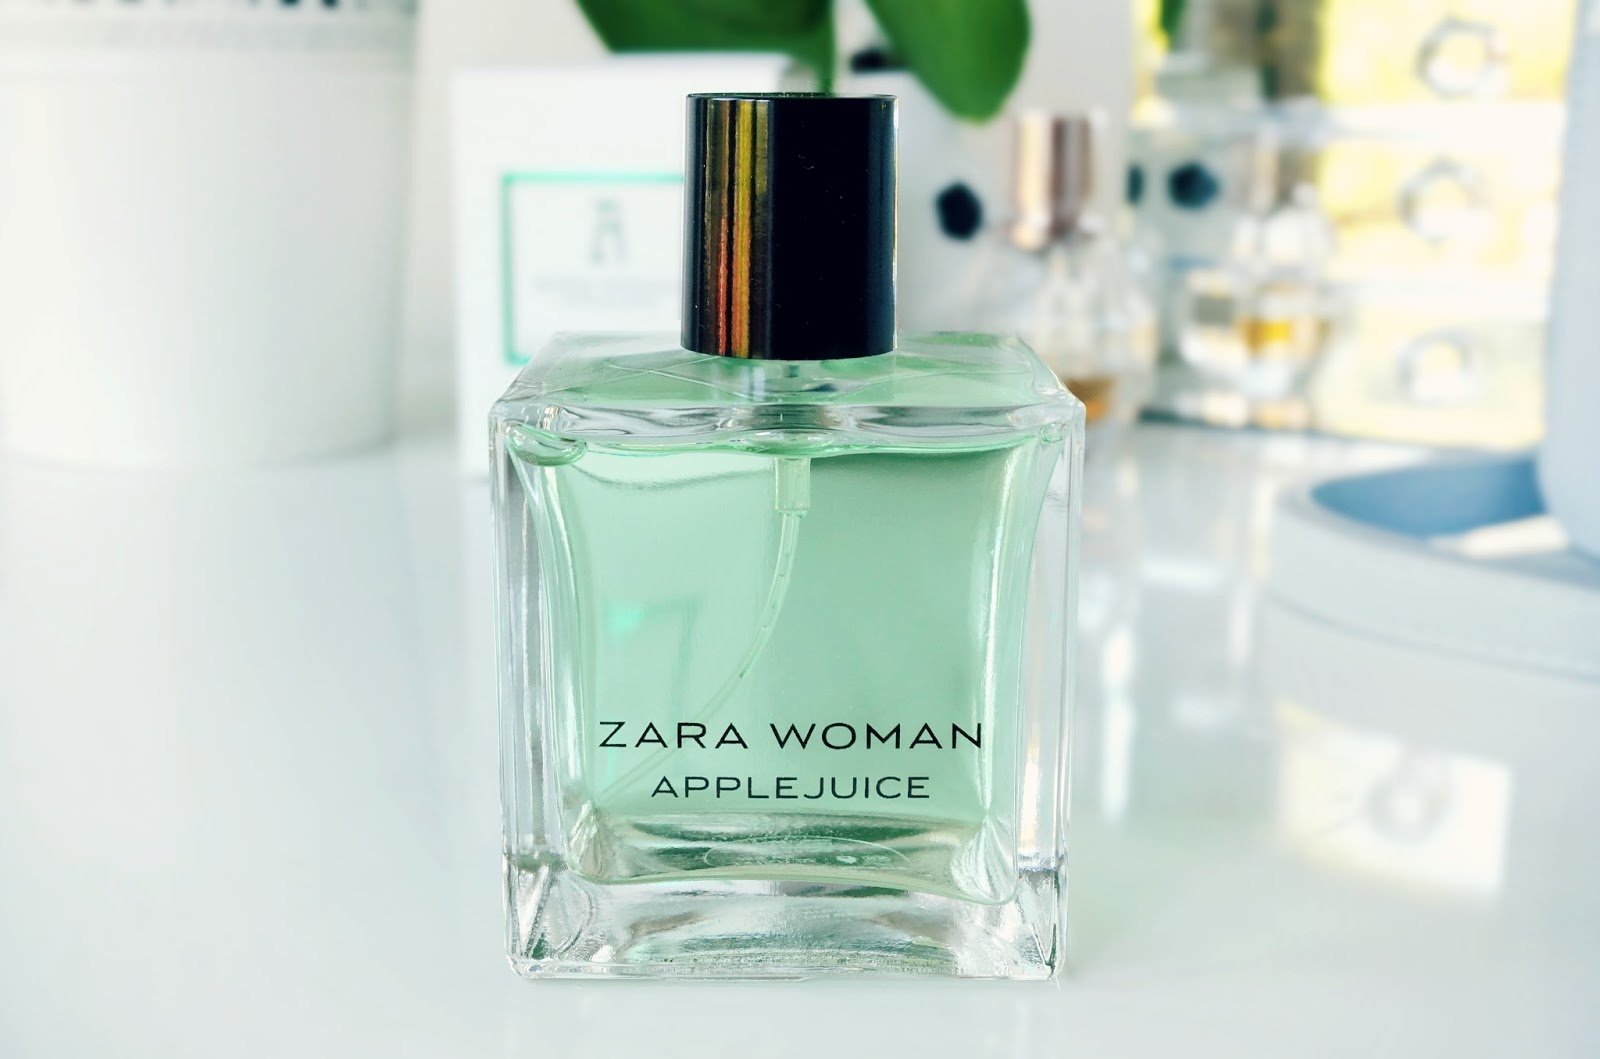 Have ever tried Zara perfumes? What's your favourite one? I'm tempted ...